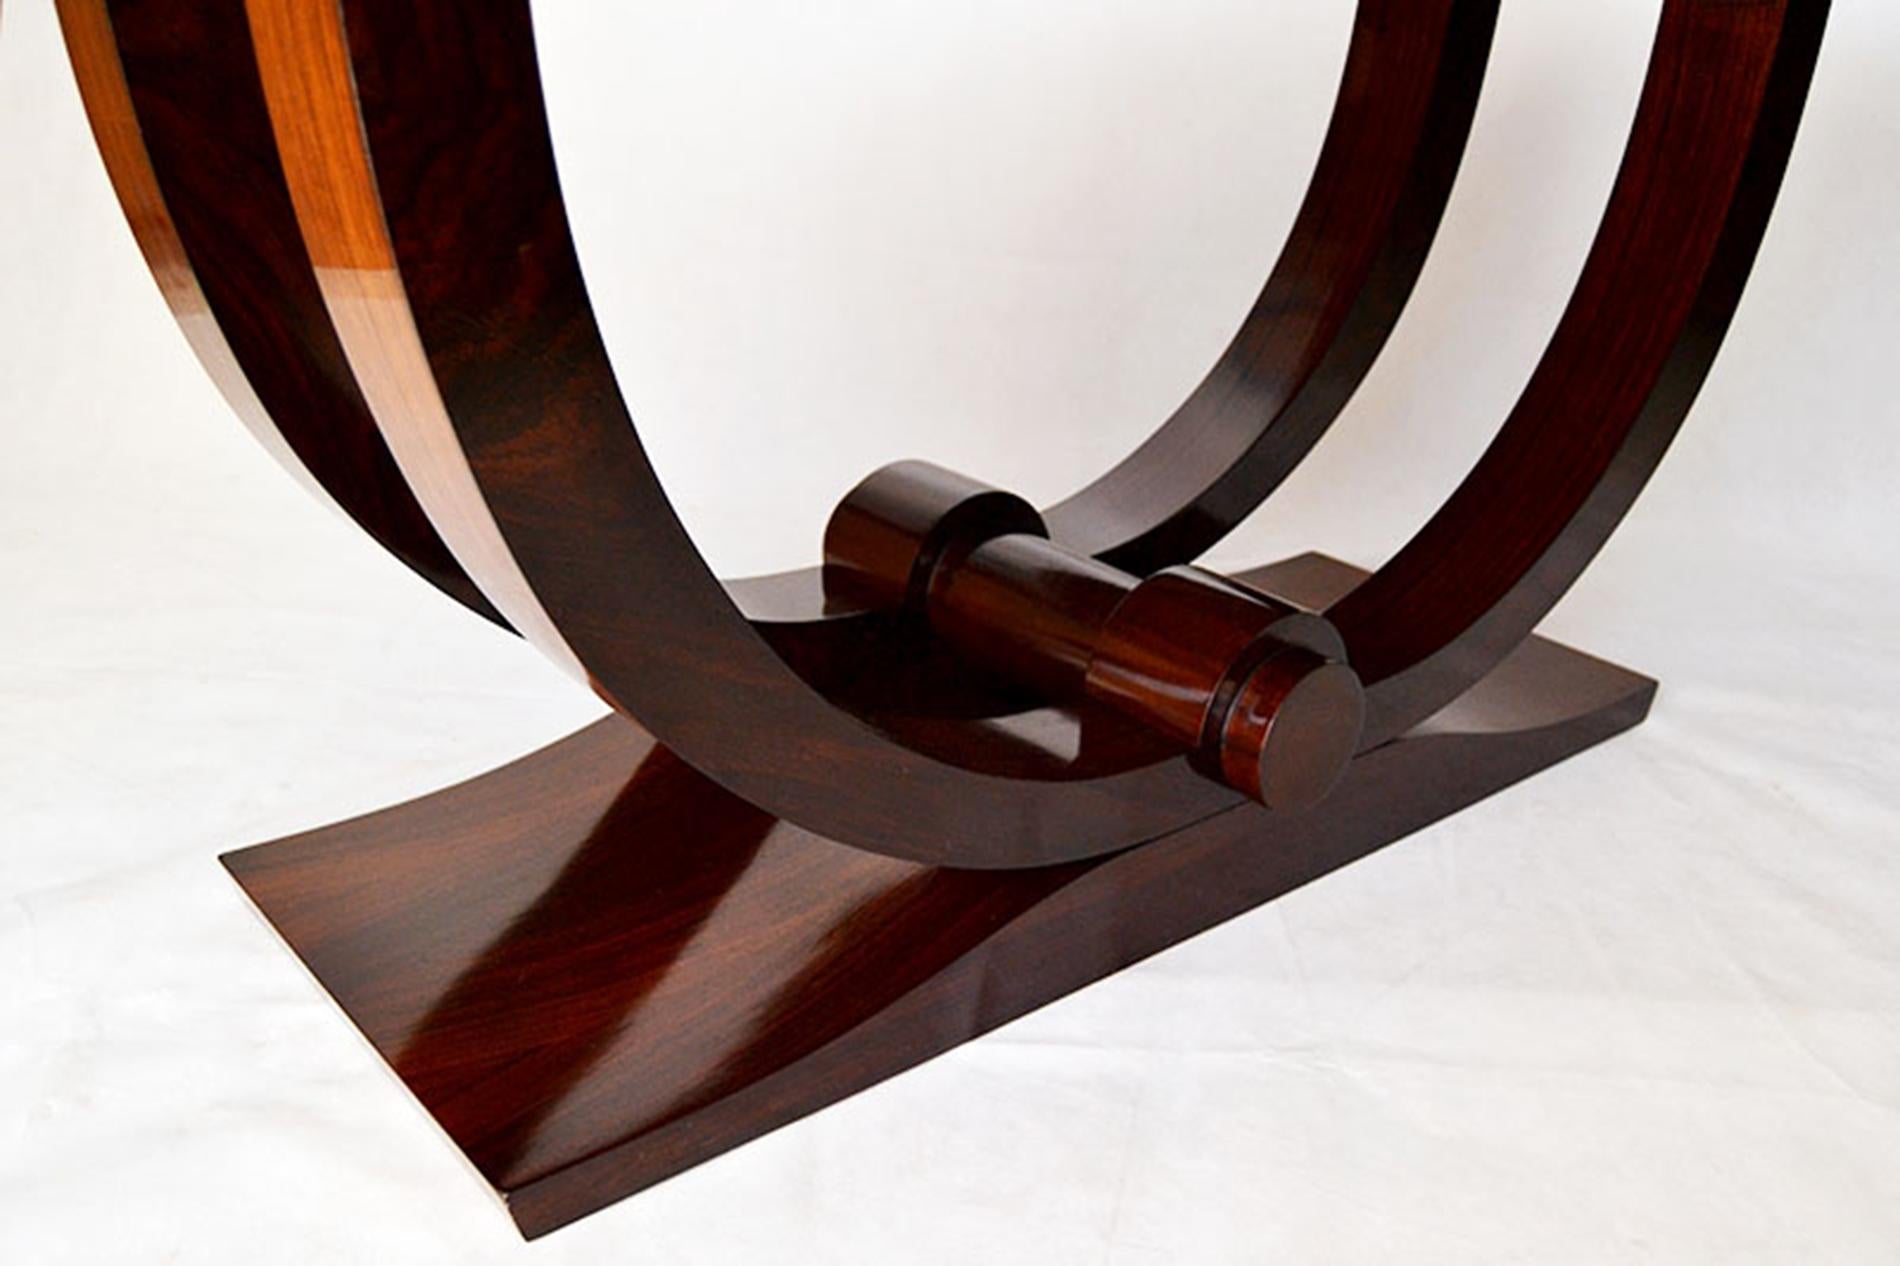 British Art Deco Table with Double Arch Base in Extendable Indian Rosewood 1930s, France For Sale